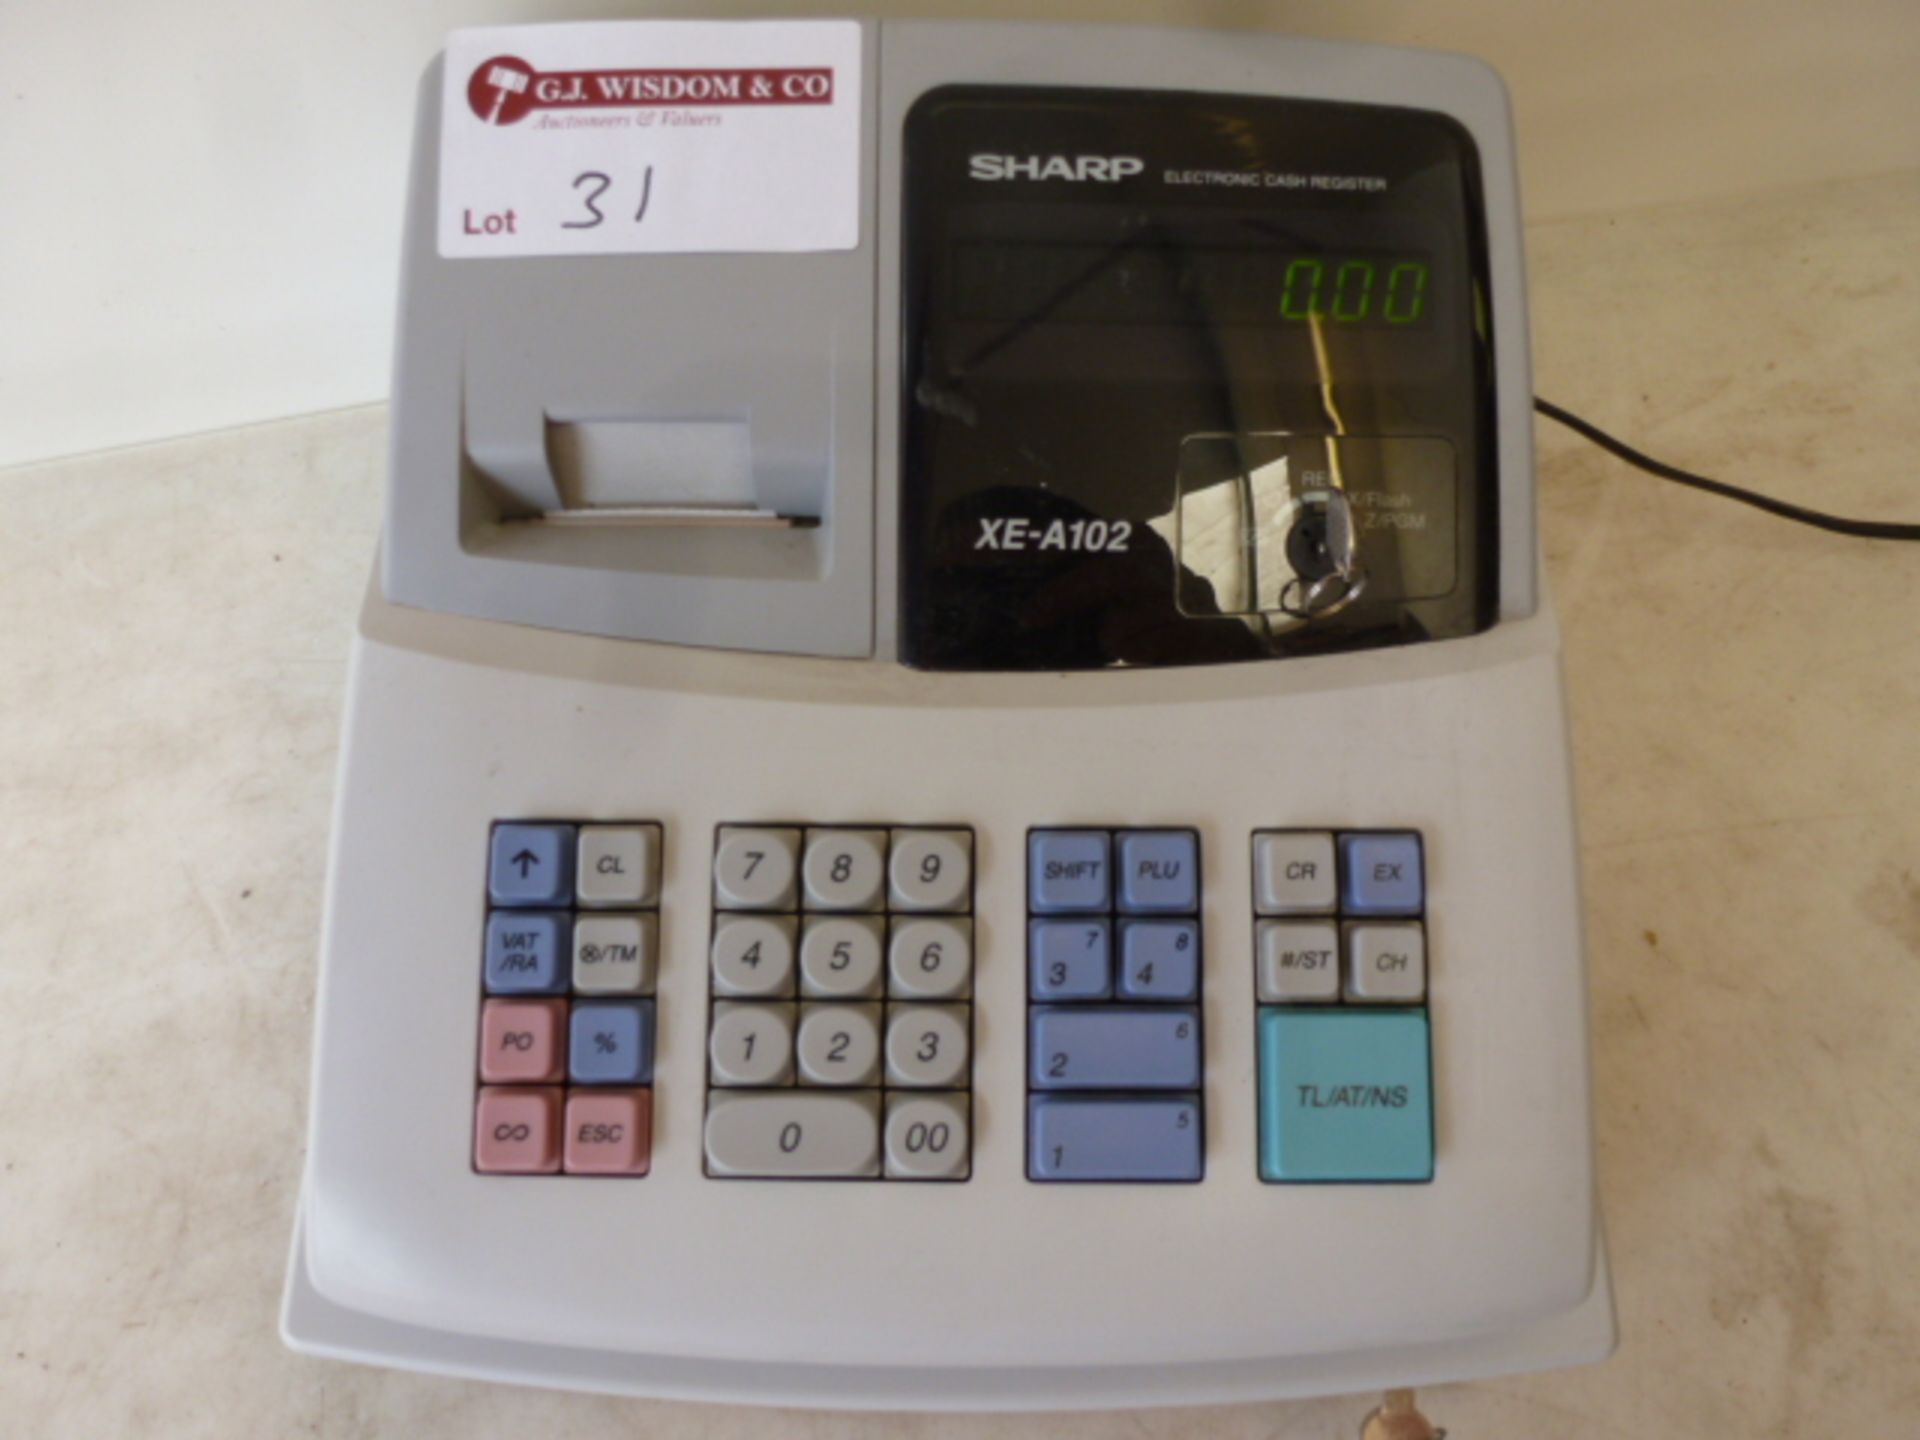 Sharp Electronic Cash Register, Model XE-A102, With Key & Cash Drawer Key - Image 3 of 4